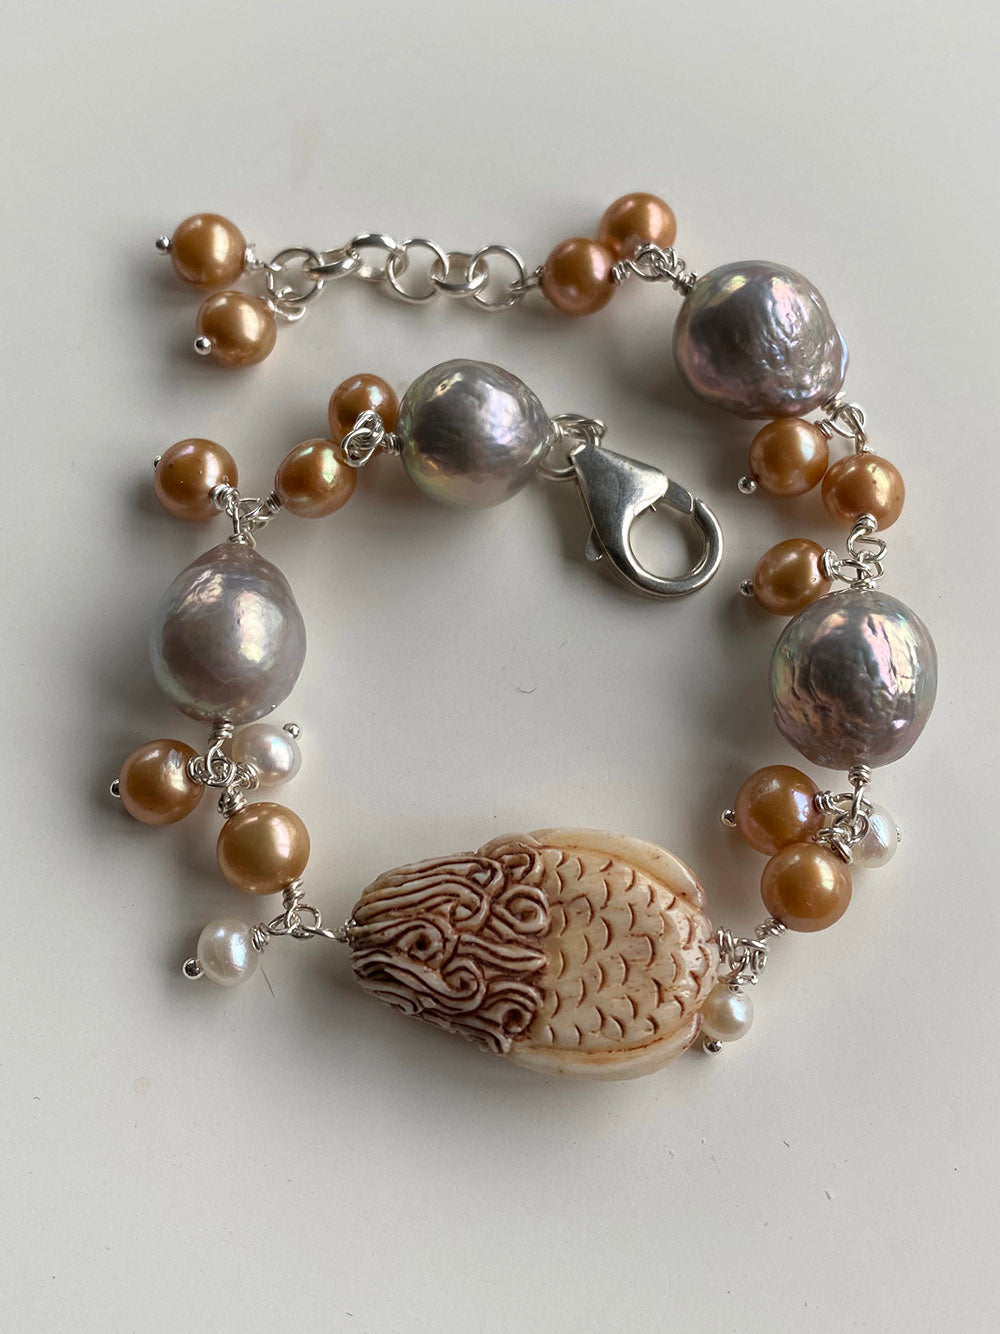 Carved Bone Mermaid Bracelet with Silver, Gold and White Freshwater Pearls by Linda Queally